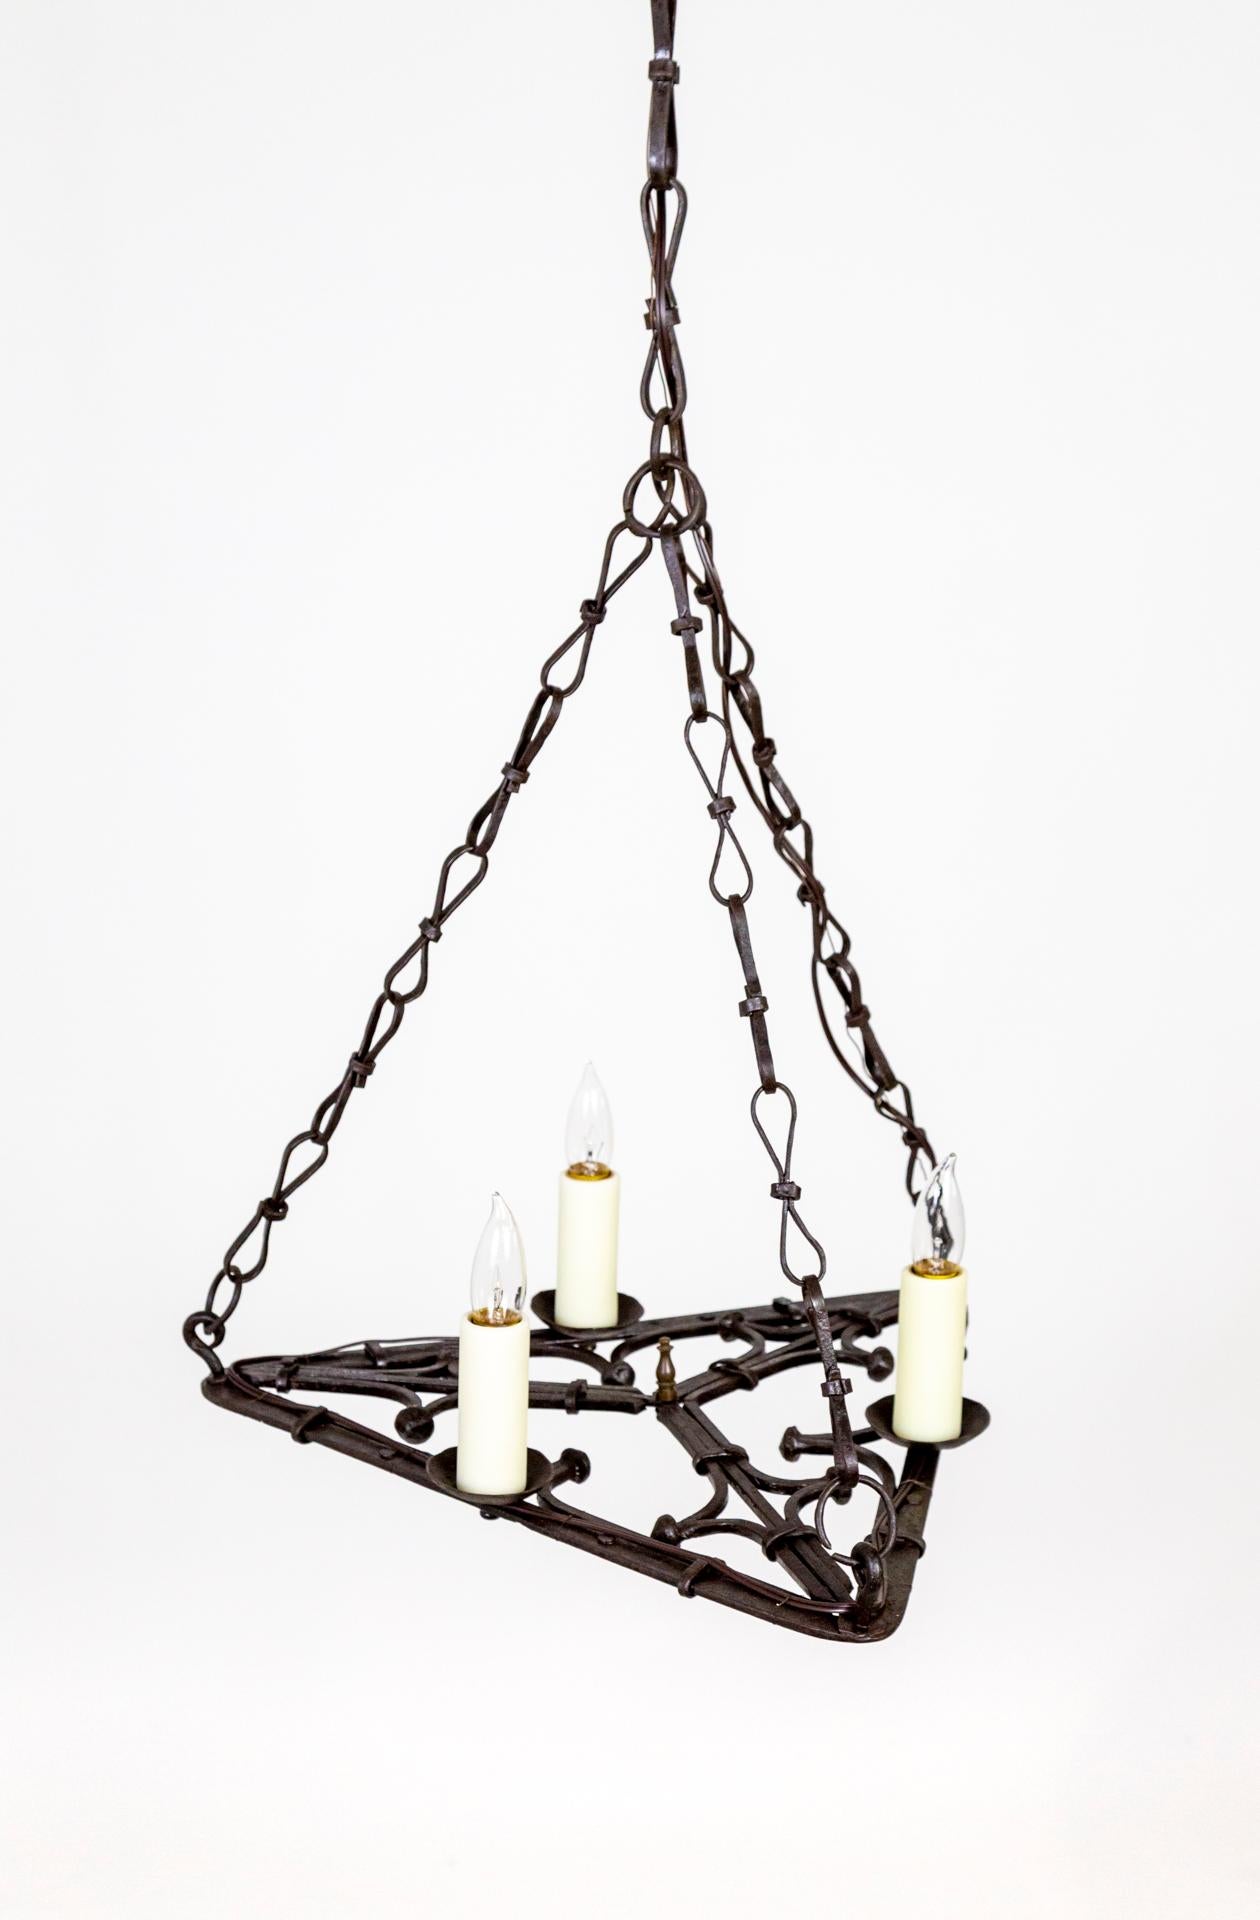 A Gothic style chandelier with three candle style lights on a flat, open, wrought iron base of curled, geometric shapes. With three hand made chains coming together to form a pyramid - mirroring the triangular shape of the body. Original ceiling